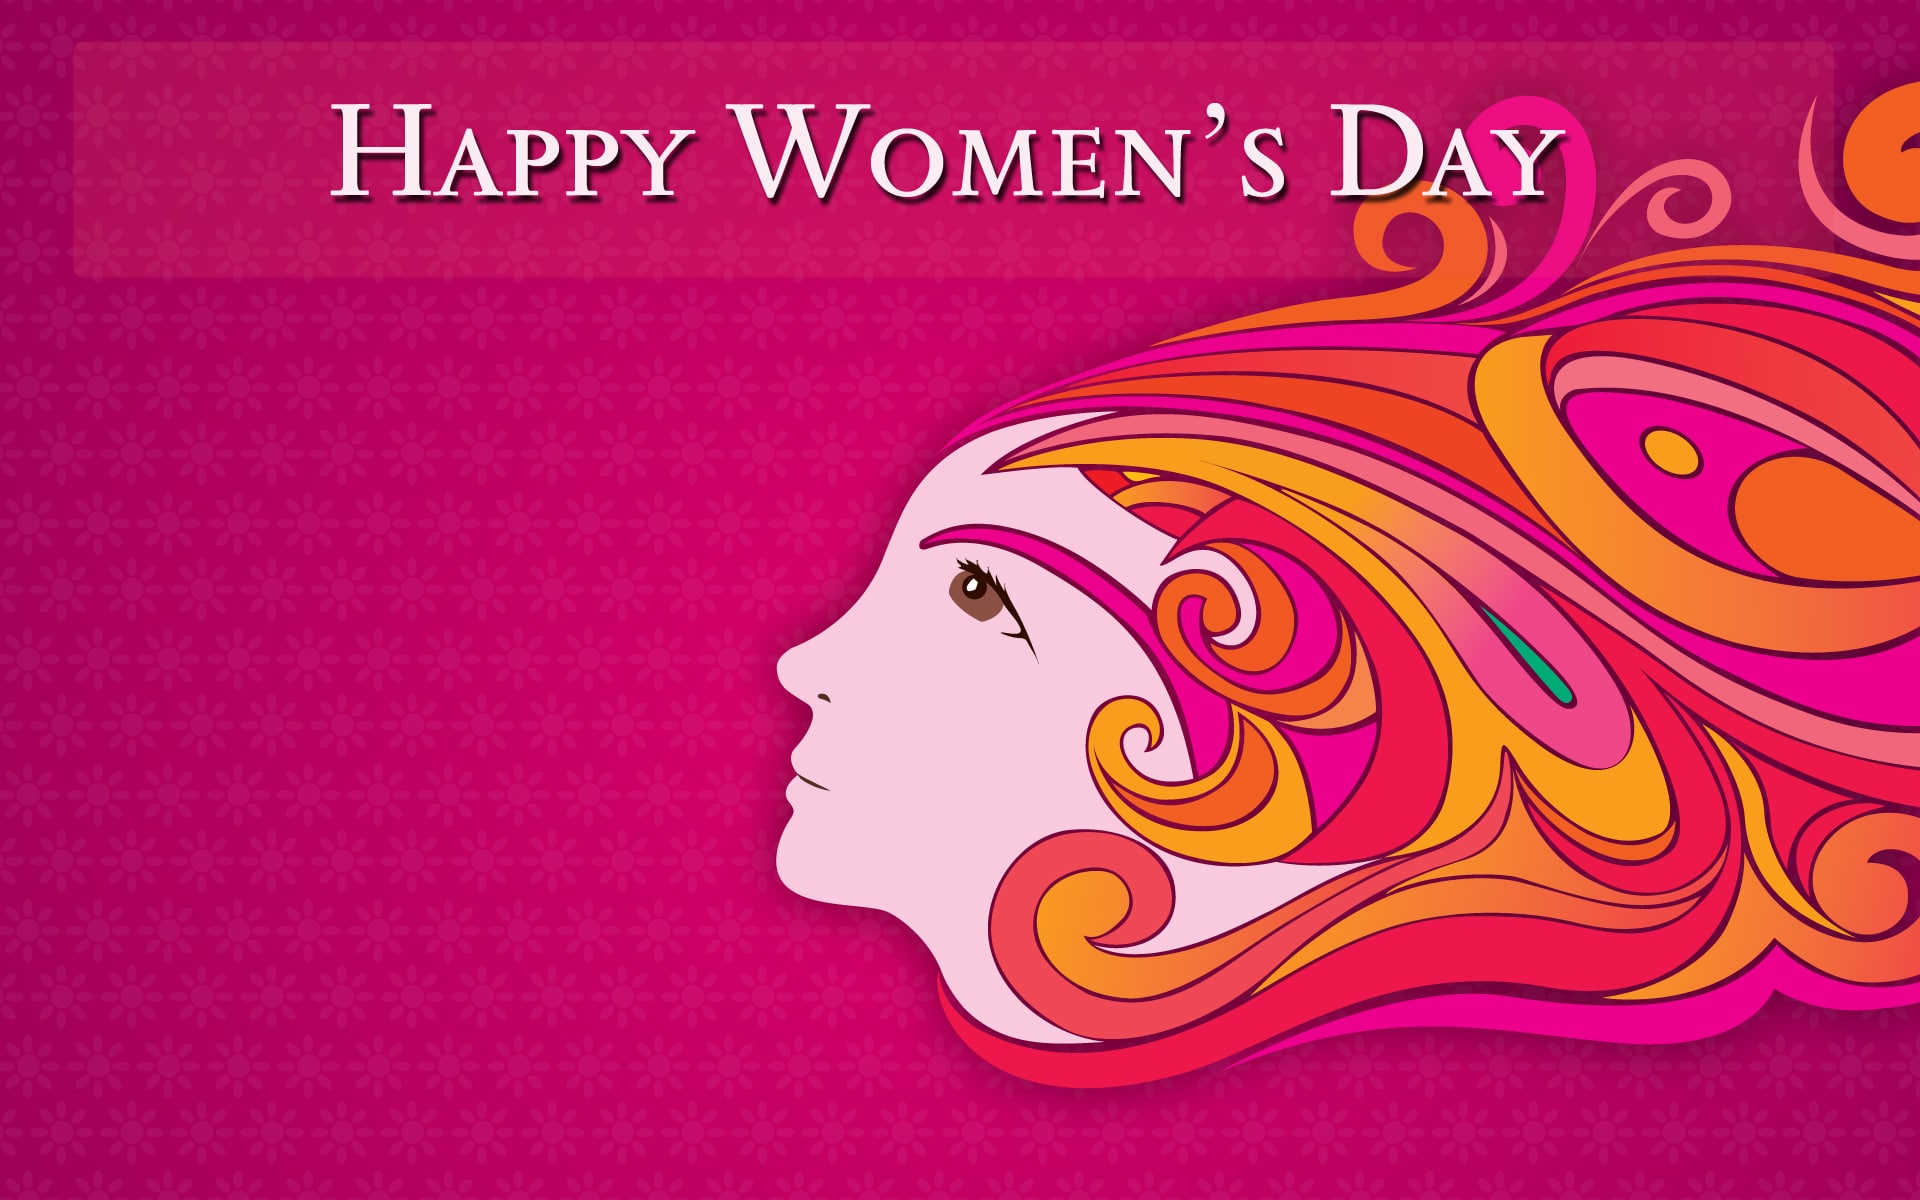 Women's Day Images,HD Wallpapers